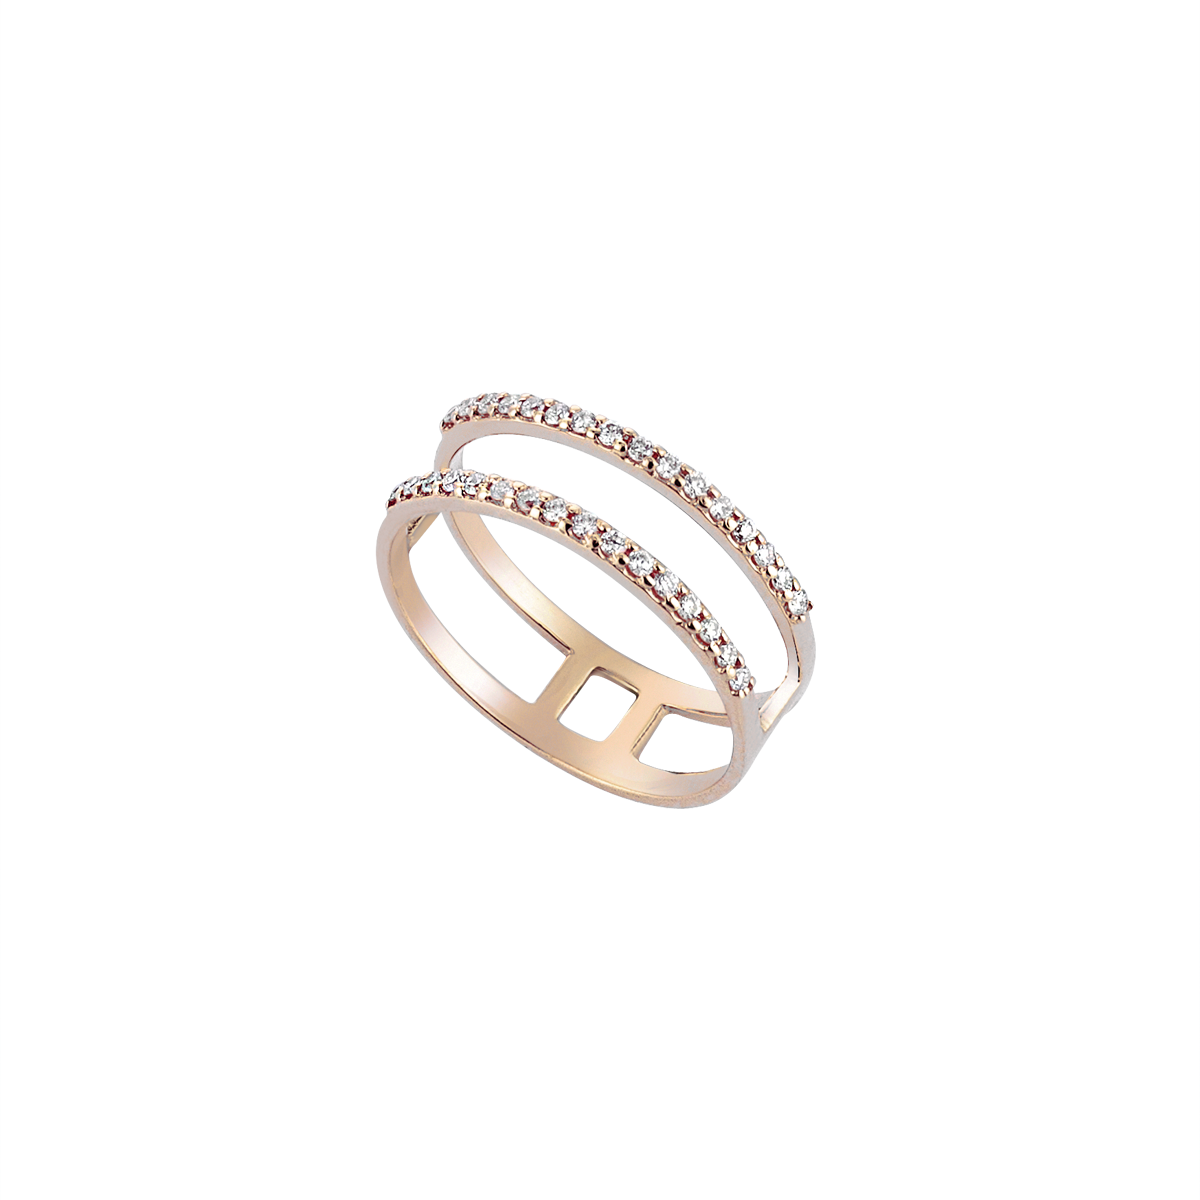 Double Diamond Line Midi Ring in Rose Gold - Her Story Shop